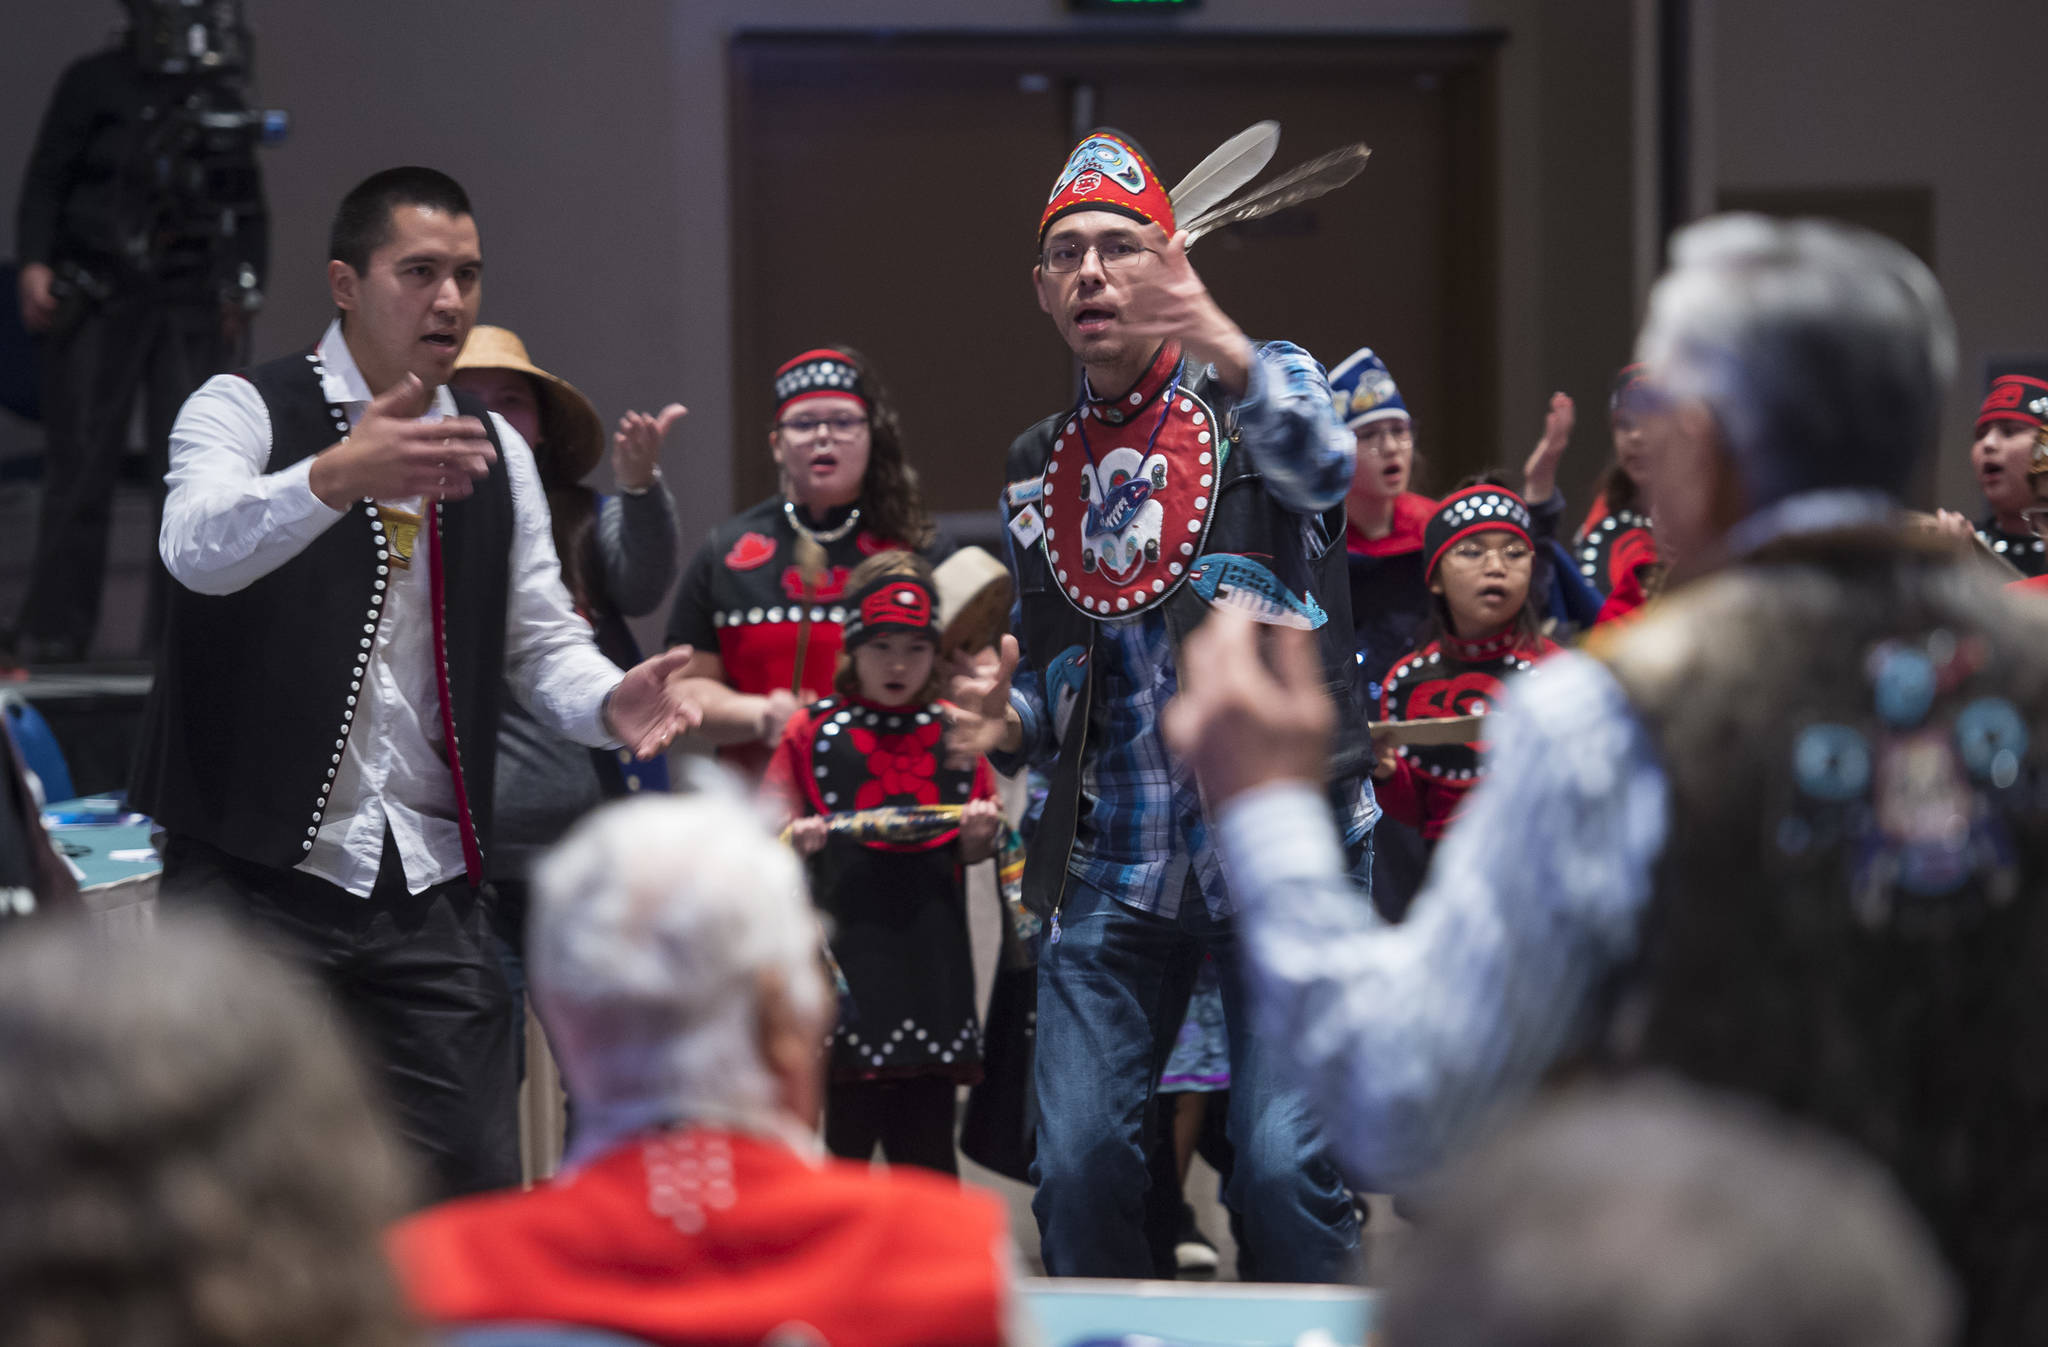 Tlingit Culture Language and Literacy Dance Group instructors Joshua Jackson, left, and Hans Chester from Harborview Elementary School dance with their students during the Voices of Our Ancestors Language Summit at Centennial Hall on Tuesday, Nov. 13, 2018. (Michael Penn | Juneau Empire)